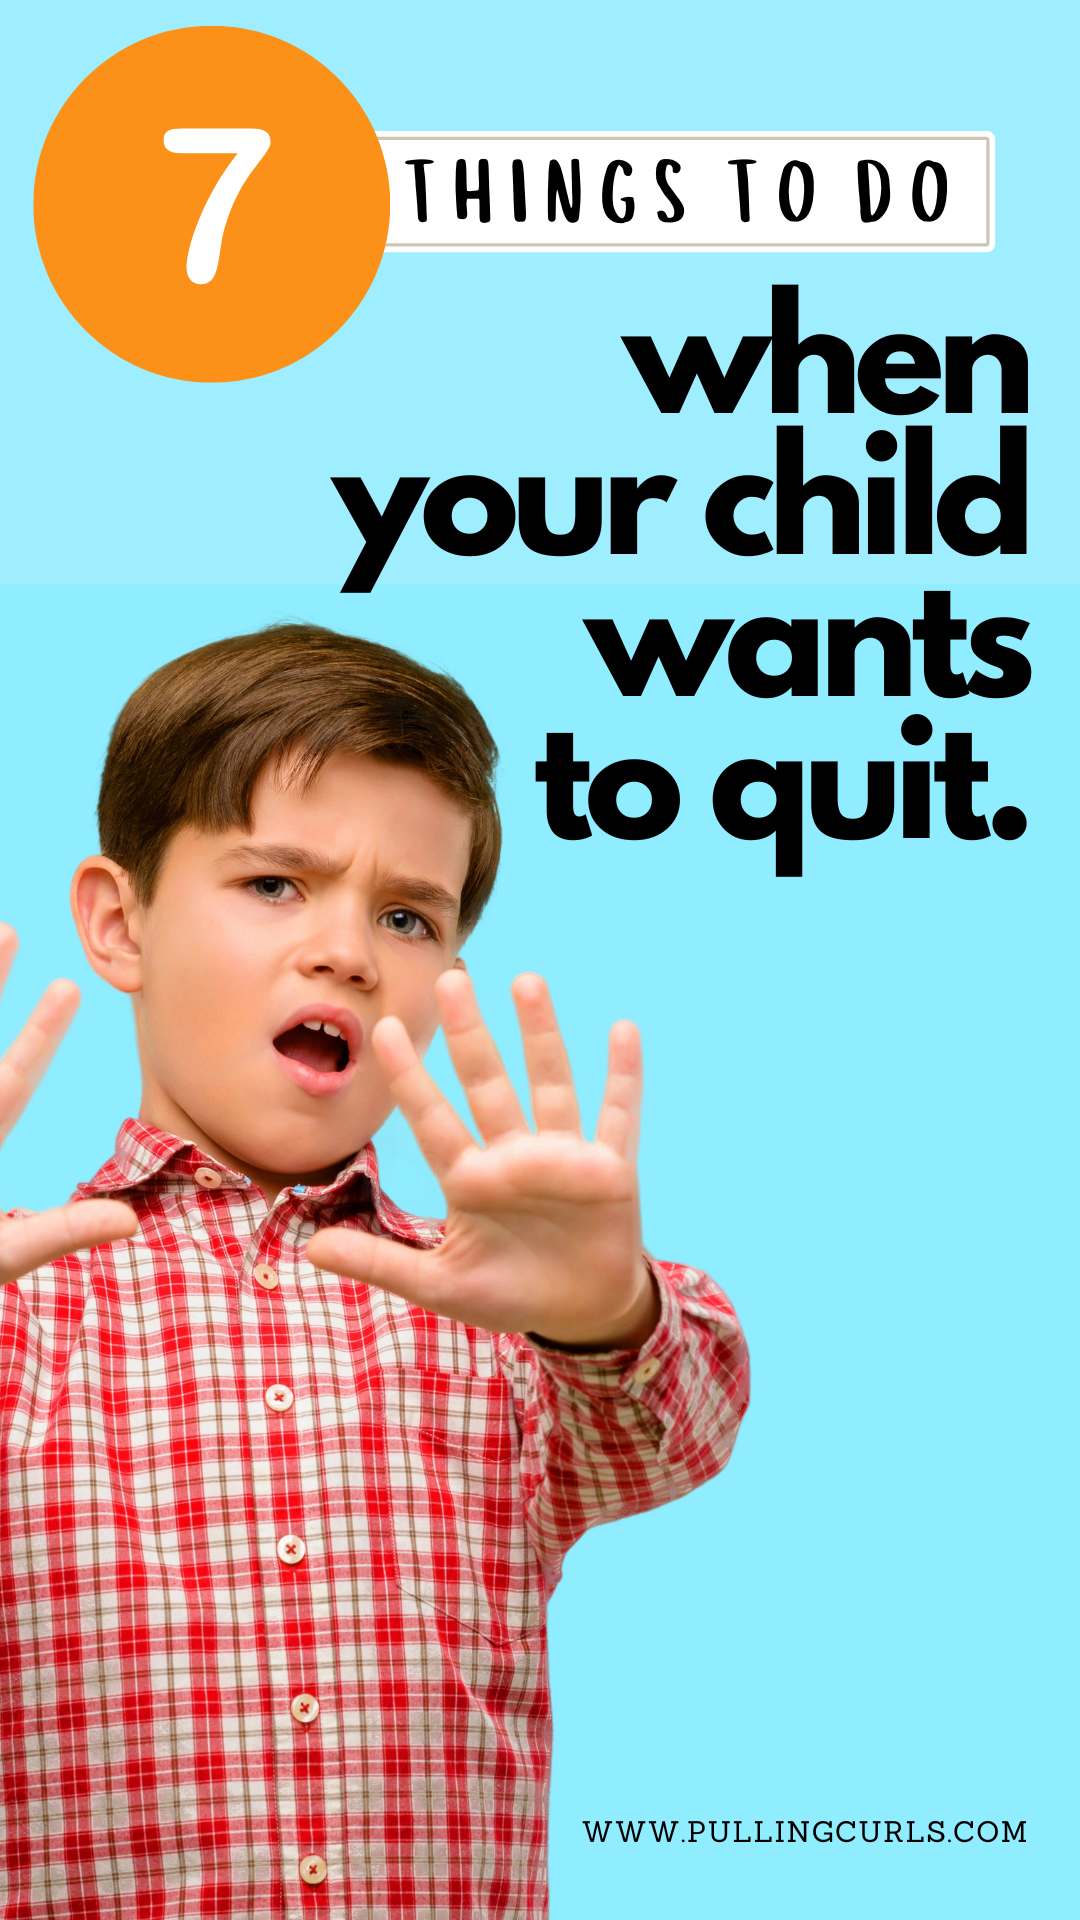 Learn how to navigate your child's desire to quit with empathy and wisdom. Gain insights on how to soften the blow, sympathize, discuss consequences, and offer alternative perspectives. An informative guide for every parent experiencing this challenging phase with their child. via @pullingcurls